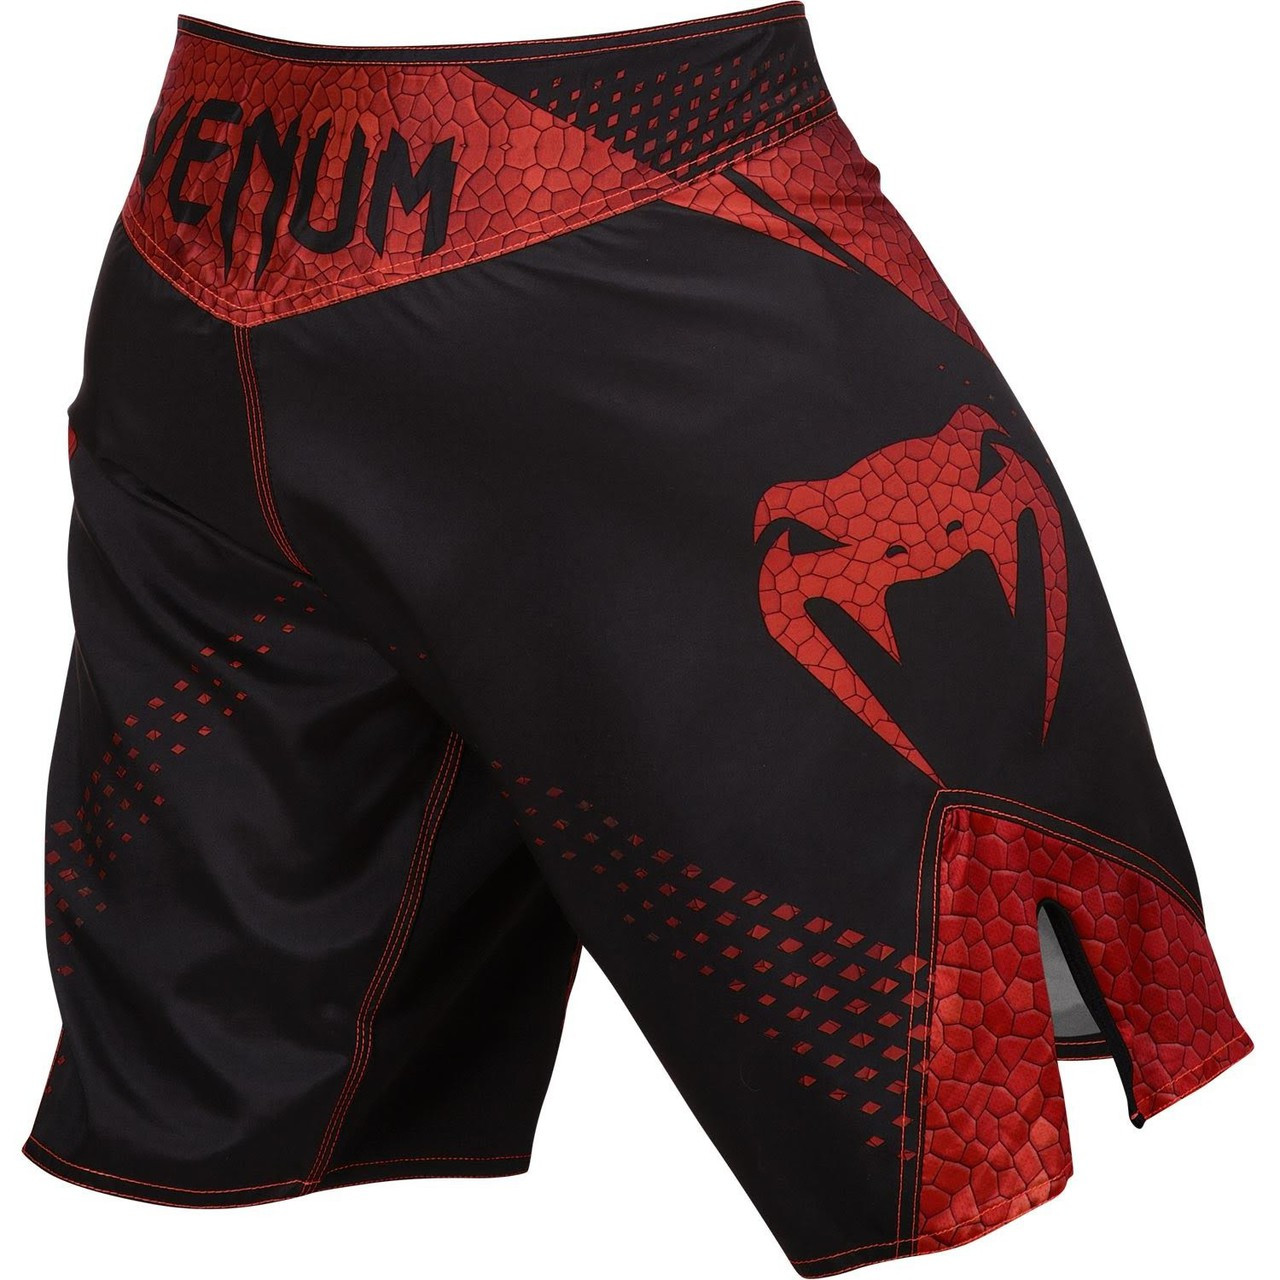 back view #2 of the new Venum Hurricane Fightshorts Amazonia Red MMA Shorts now available at www.thejiujitsushop.com

Top MMA and Grappling Shorts

Enjoy Free Shipping from The Jiu Jitsu Shop today! 